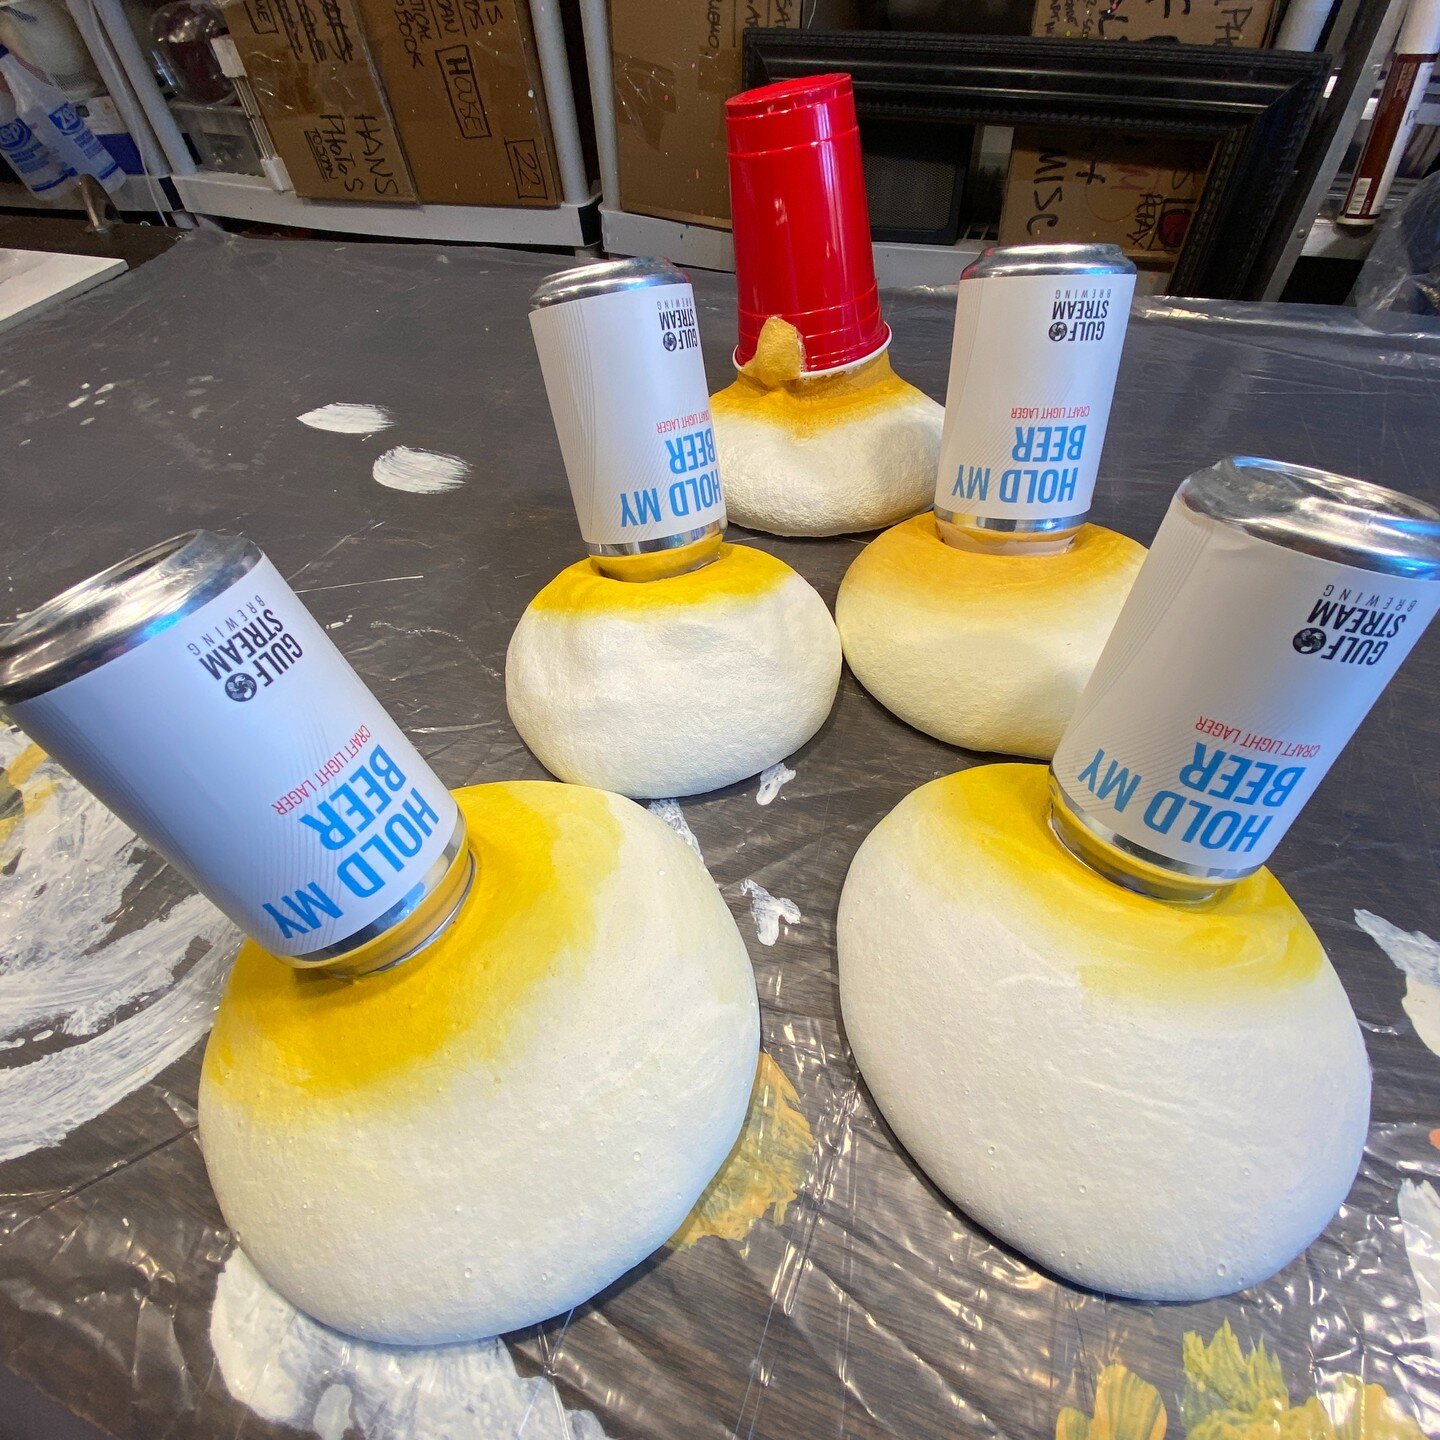 Currently working on &quot;Hold My Beer(s)&quot; from Gulf Stream Breweries of Ft. Lauderdale FL. Love the name!
#art #painting #sculpture #resin #beer